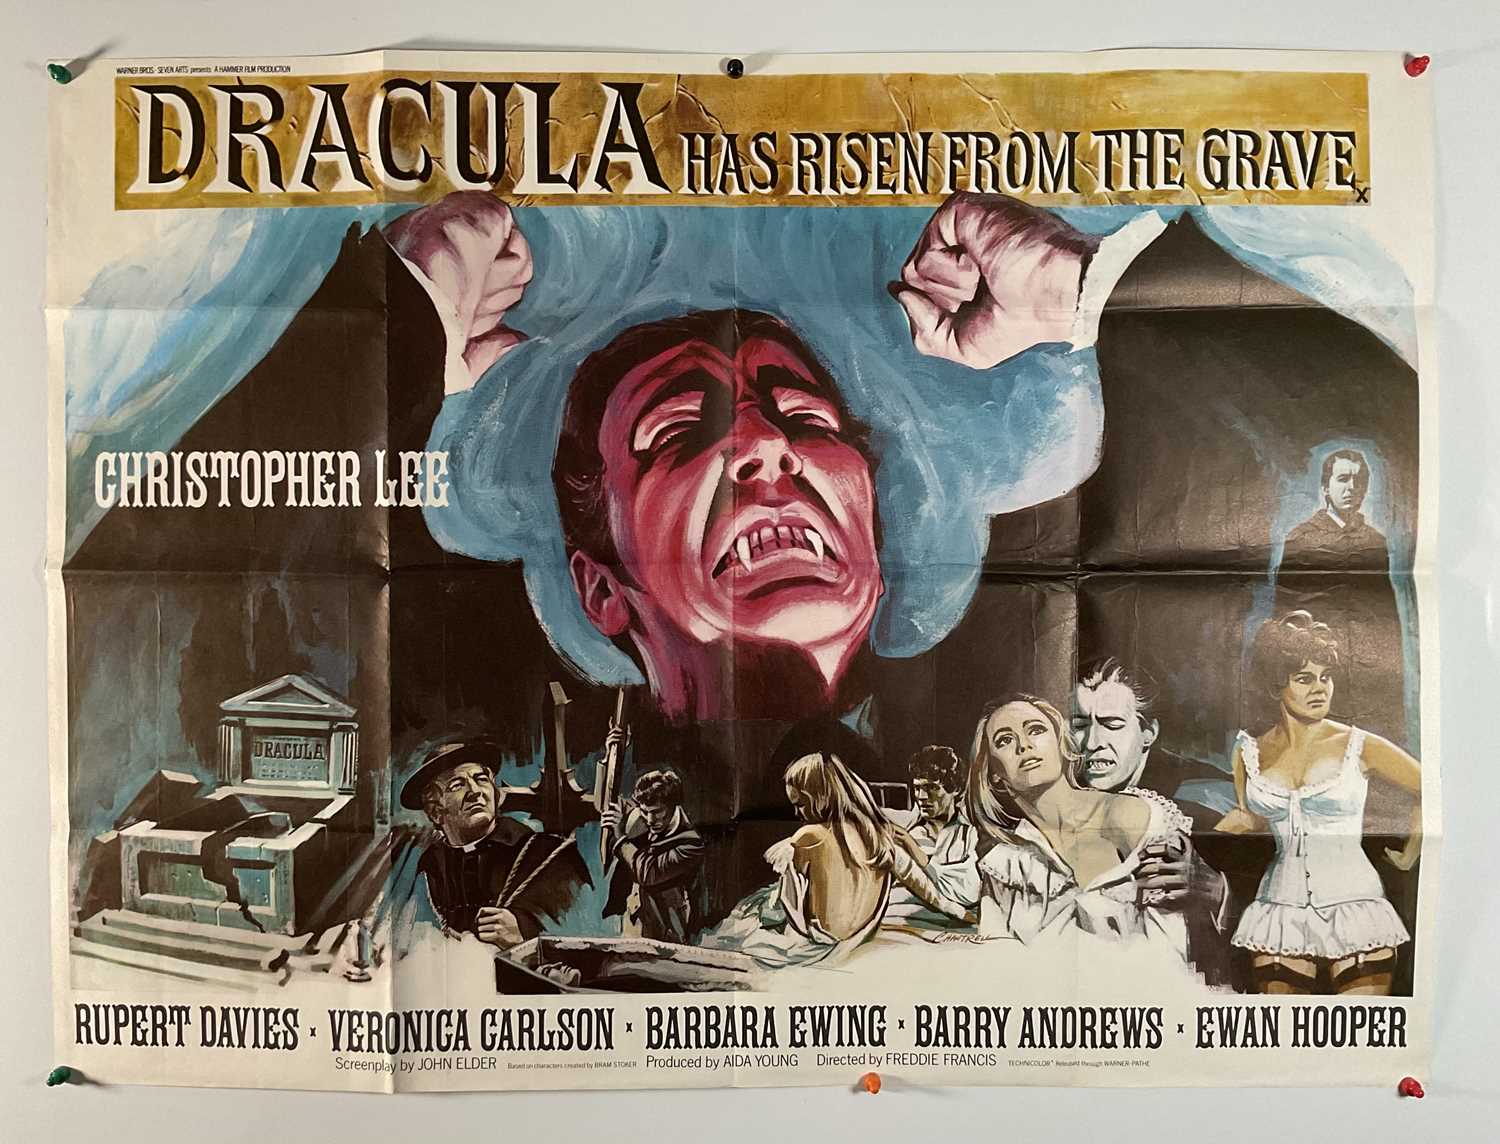 DRACULA HAS RISEN FROM THE GRAVE (1969) - UK Quad film poster, Tom Chantrell artwork of